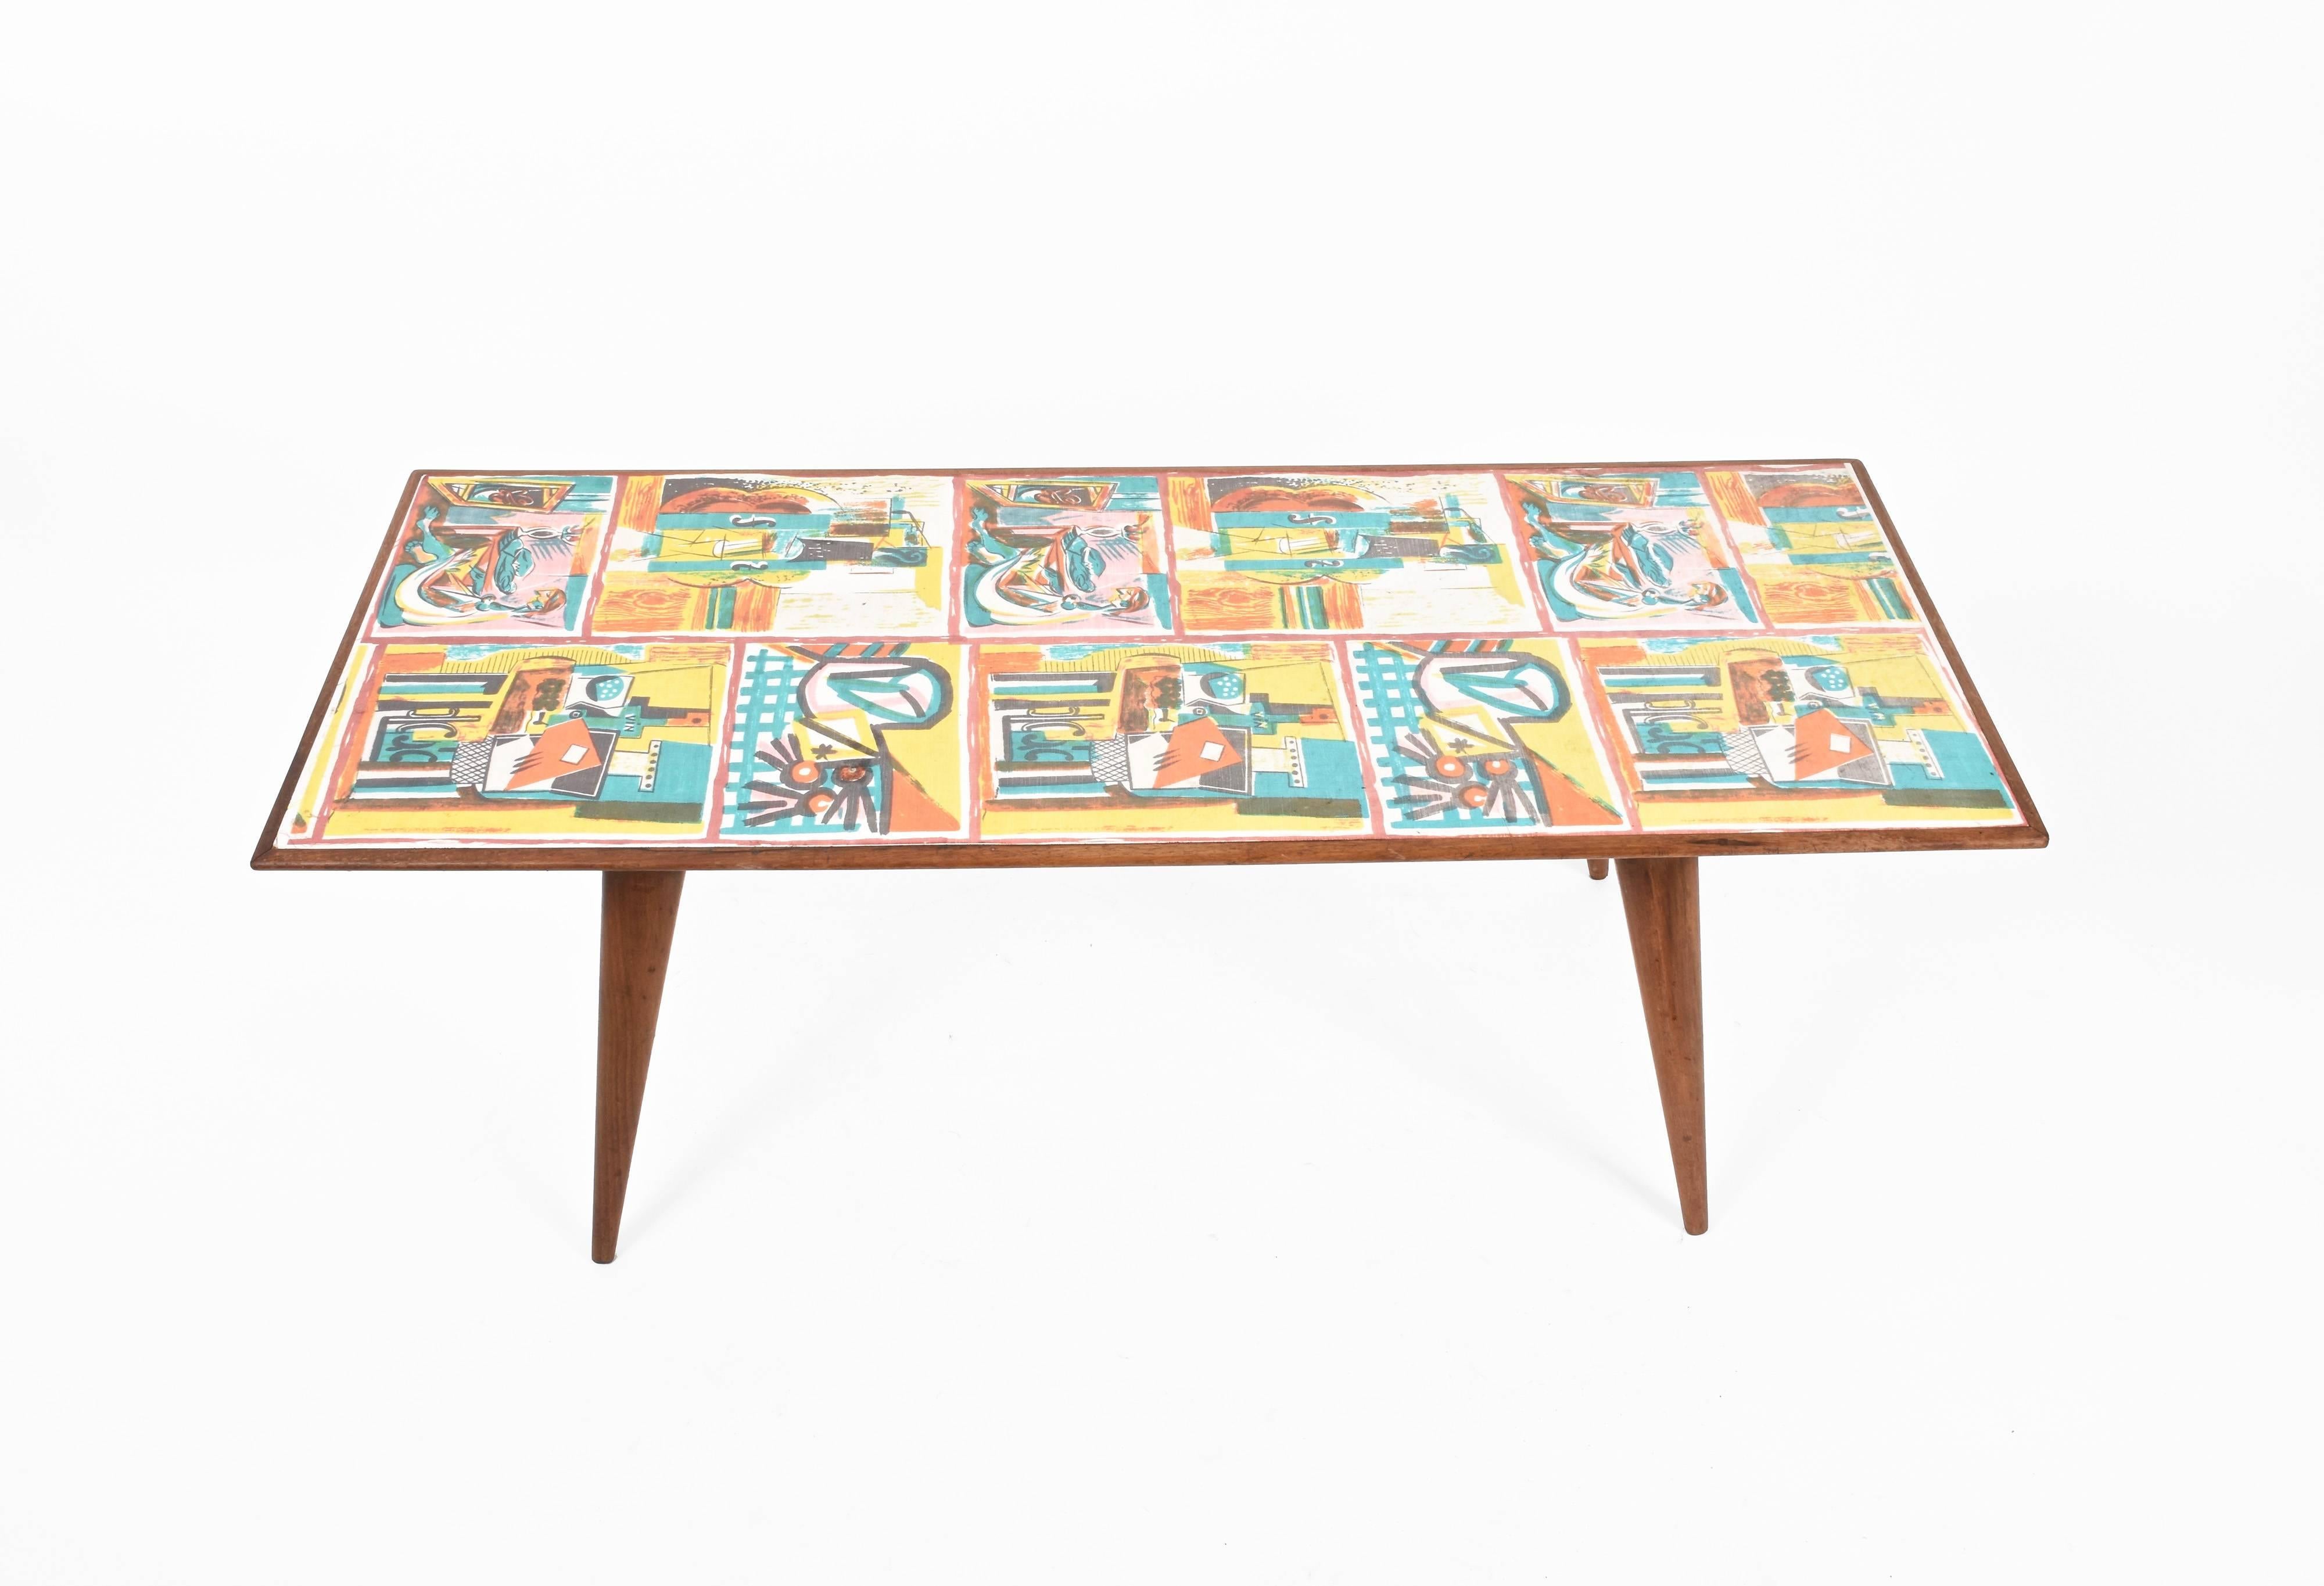 Midcentury Printed Wood and Plastic Italian Coffee Table after De Poli, 1950s For Sale 3